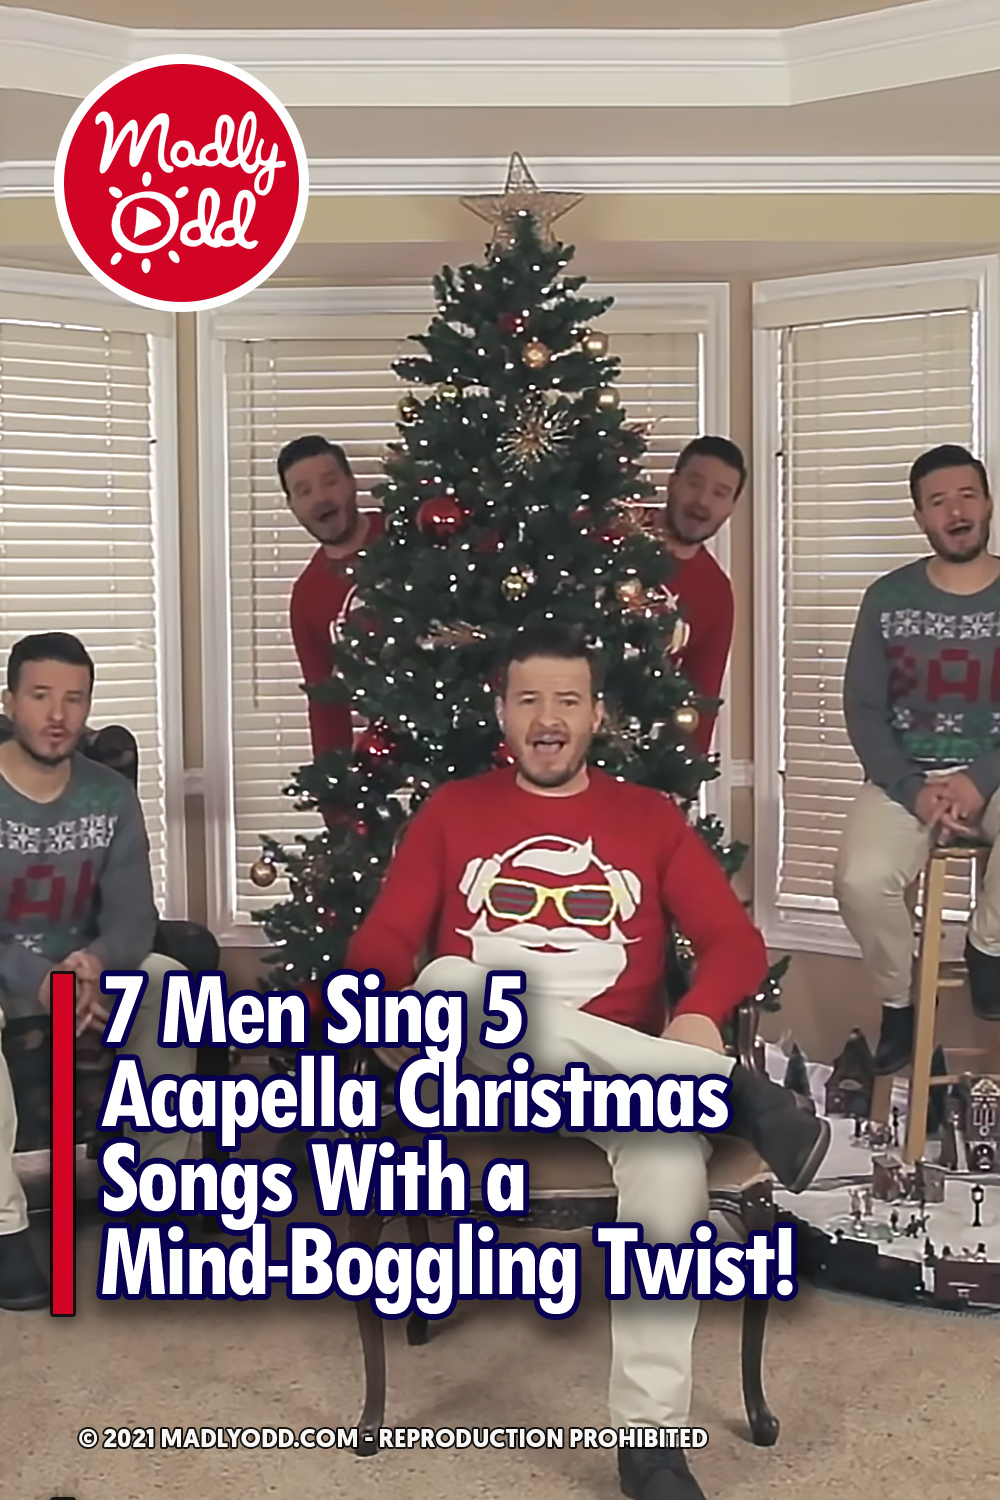 7 Men Sing 5 Acapella Christmas Songs With a Mind-Boggling Twist!